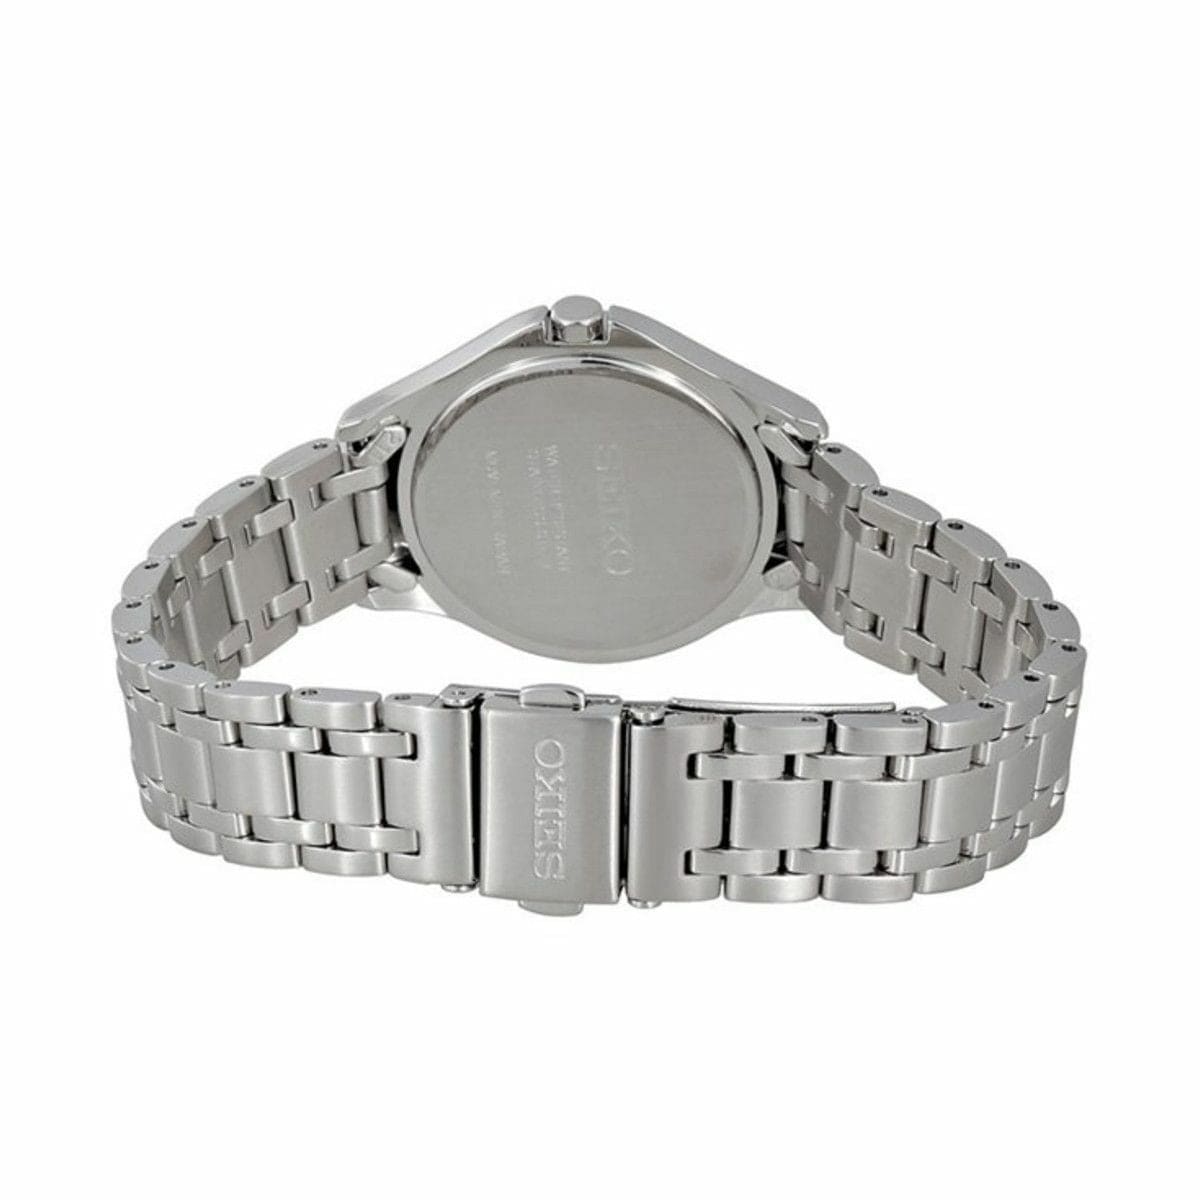 Seiko SUT311 Core Swarovski Crystals Accent Bezel Mother of Pearl Dial Women's Watch 029665186416